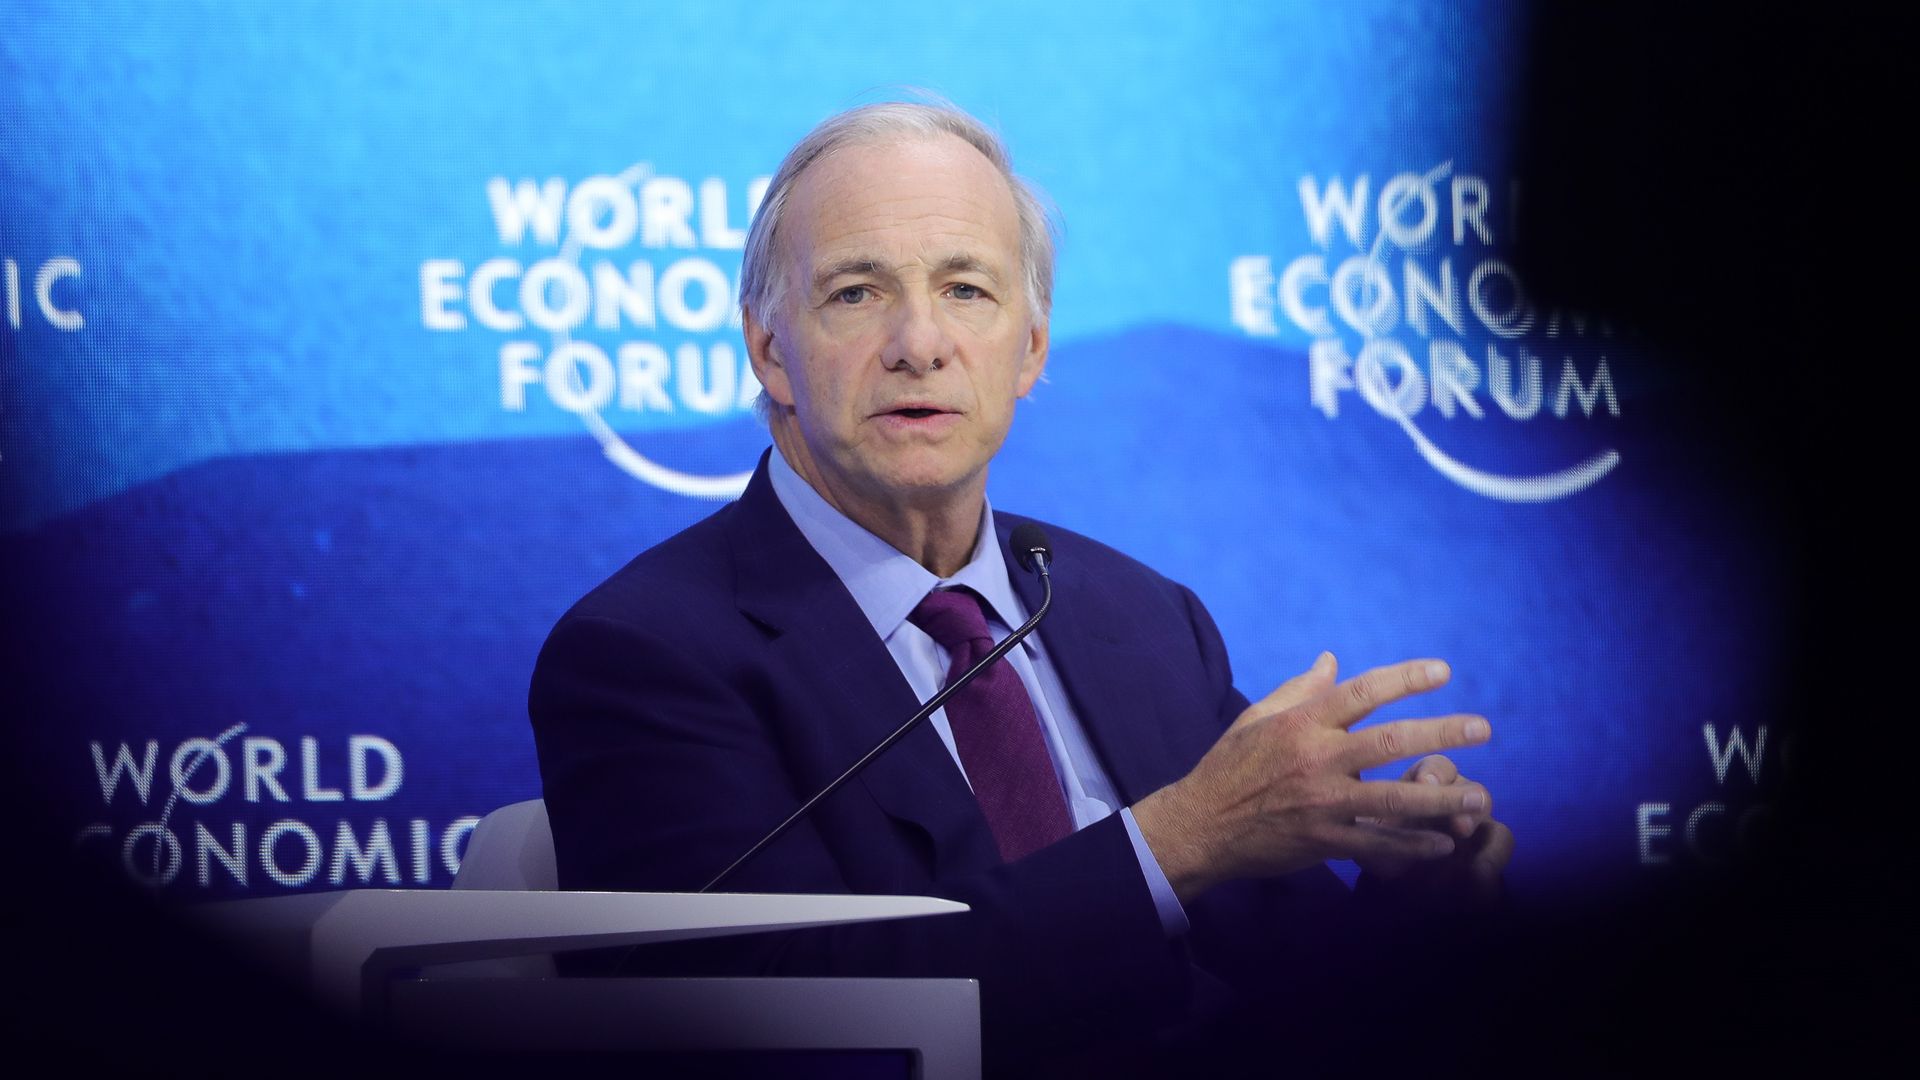 Co-Chairman and Co-Chief Investment Officer of Bridgewater Associates Ray Dalio attends a session during the World Economic Forum.